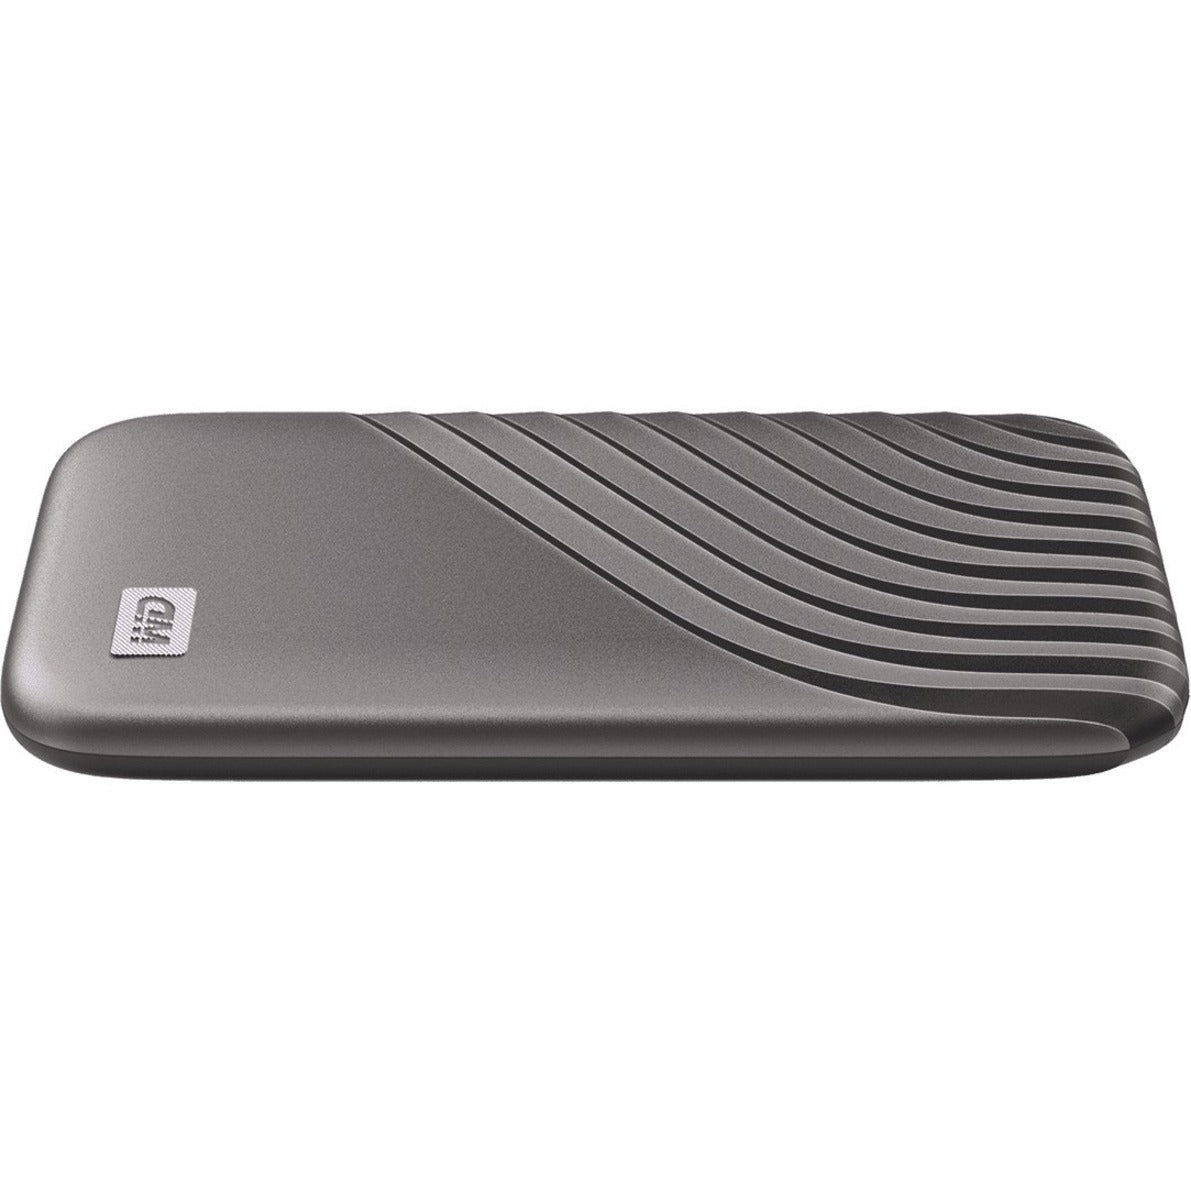 WD WDBAGF0020BGY-WESN My Passport Solid State Drive, 2TB, USB 3.2 Type C, Space Gray